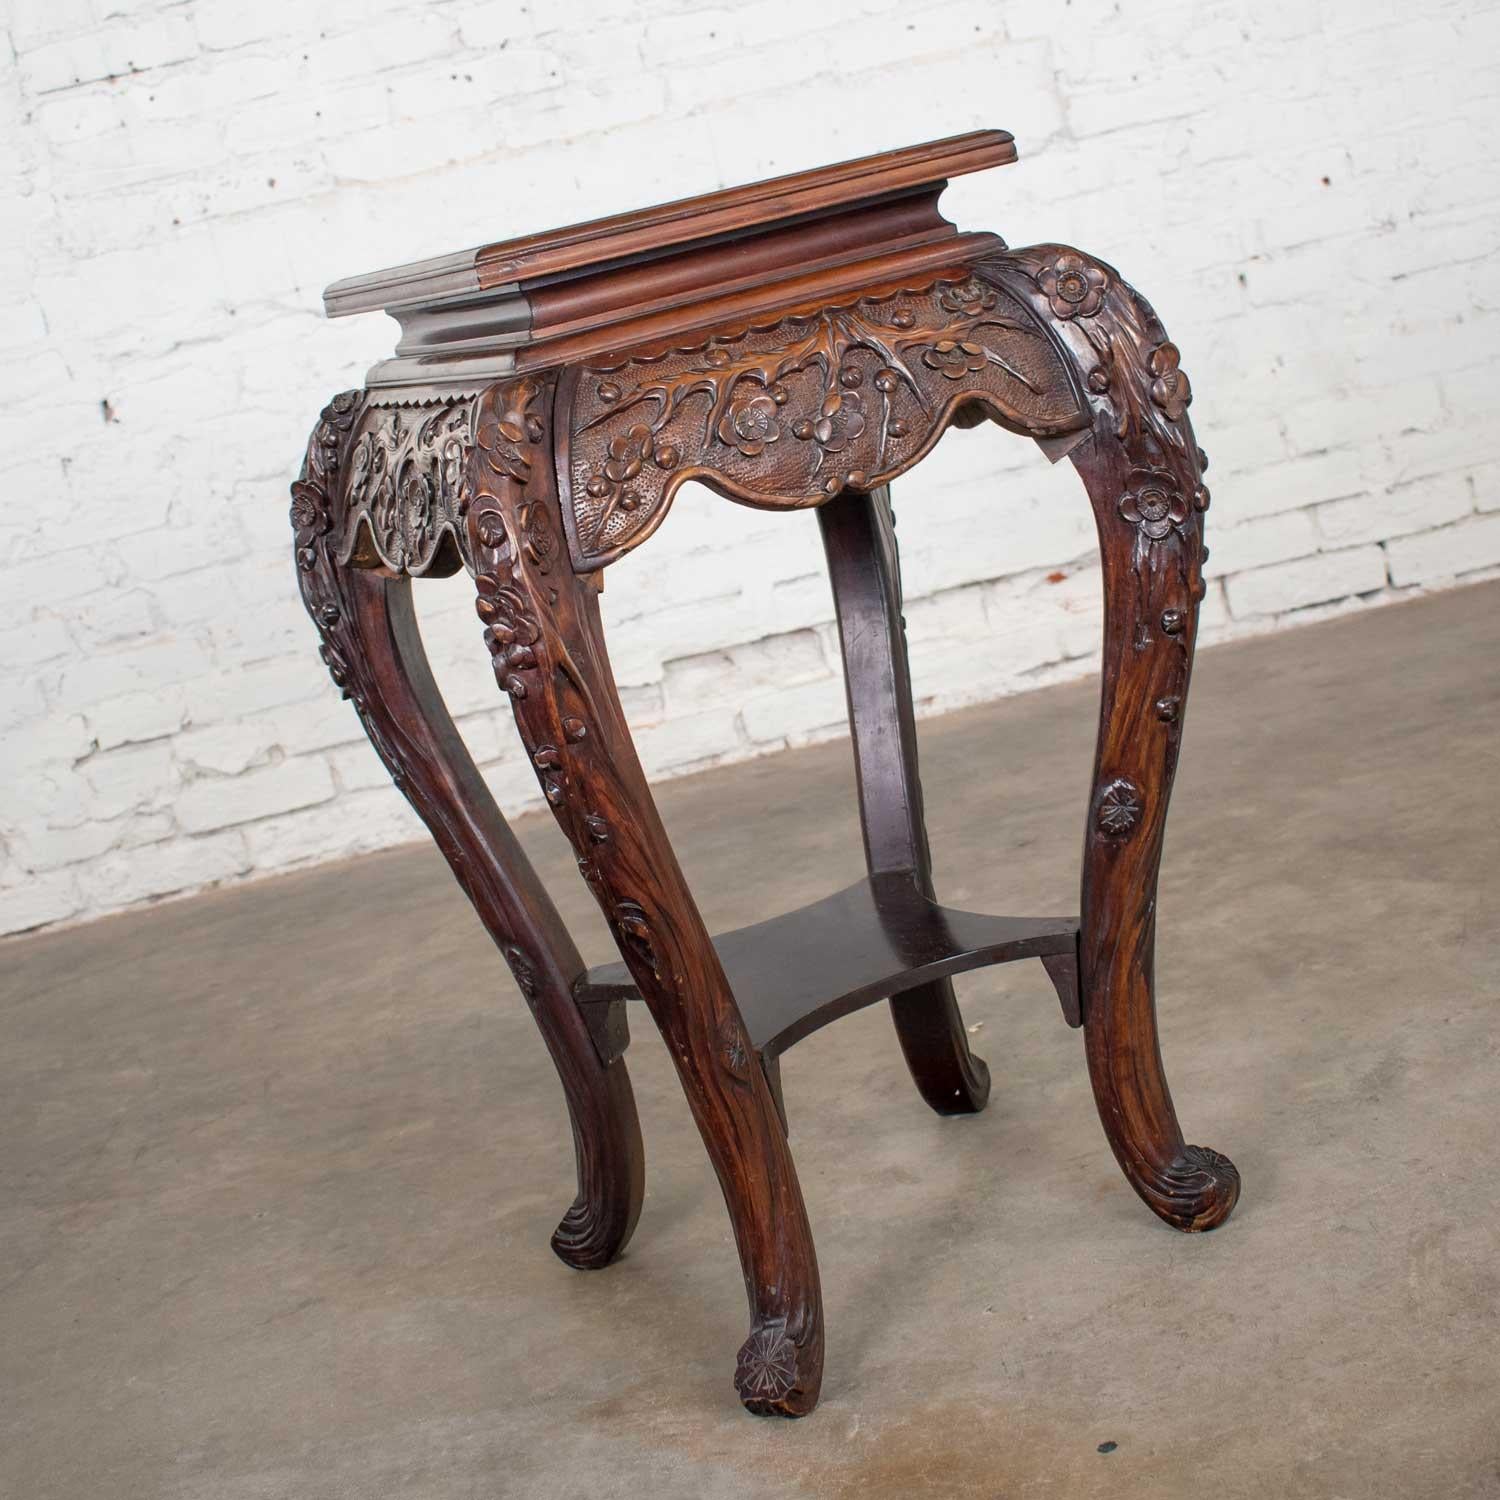 Stunning antique Asian pedestal table with hand carved cherry blossoms rosewood color and comprised of multiple Asian hardwoods. It is in beautiful vintage condition, it is sturdy and intact and has been completely re glued and touched up. Age